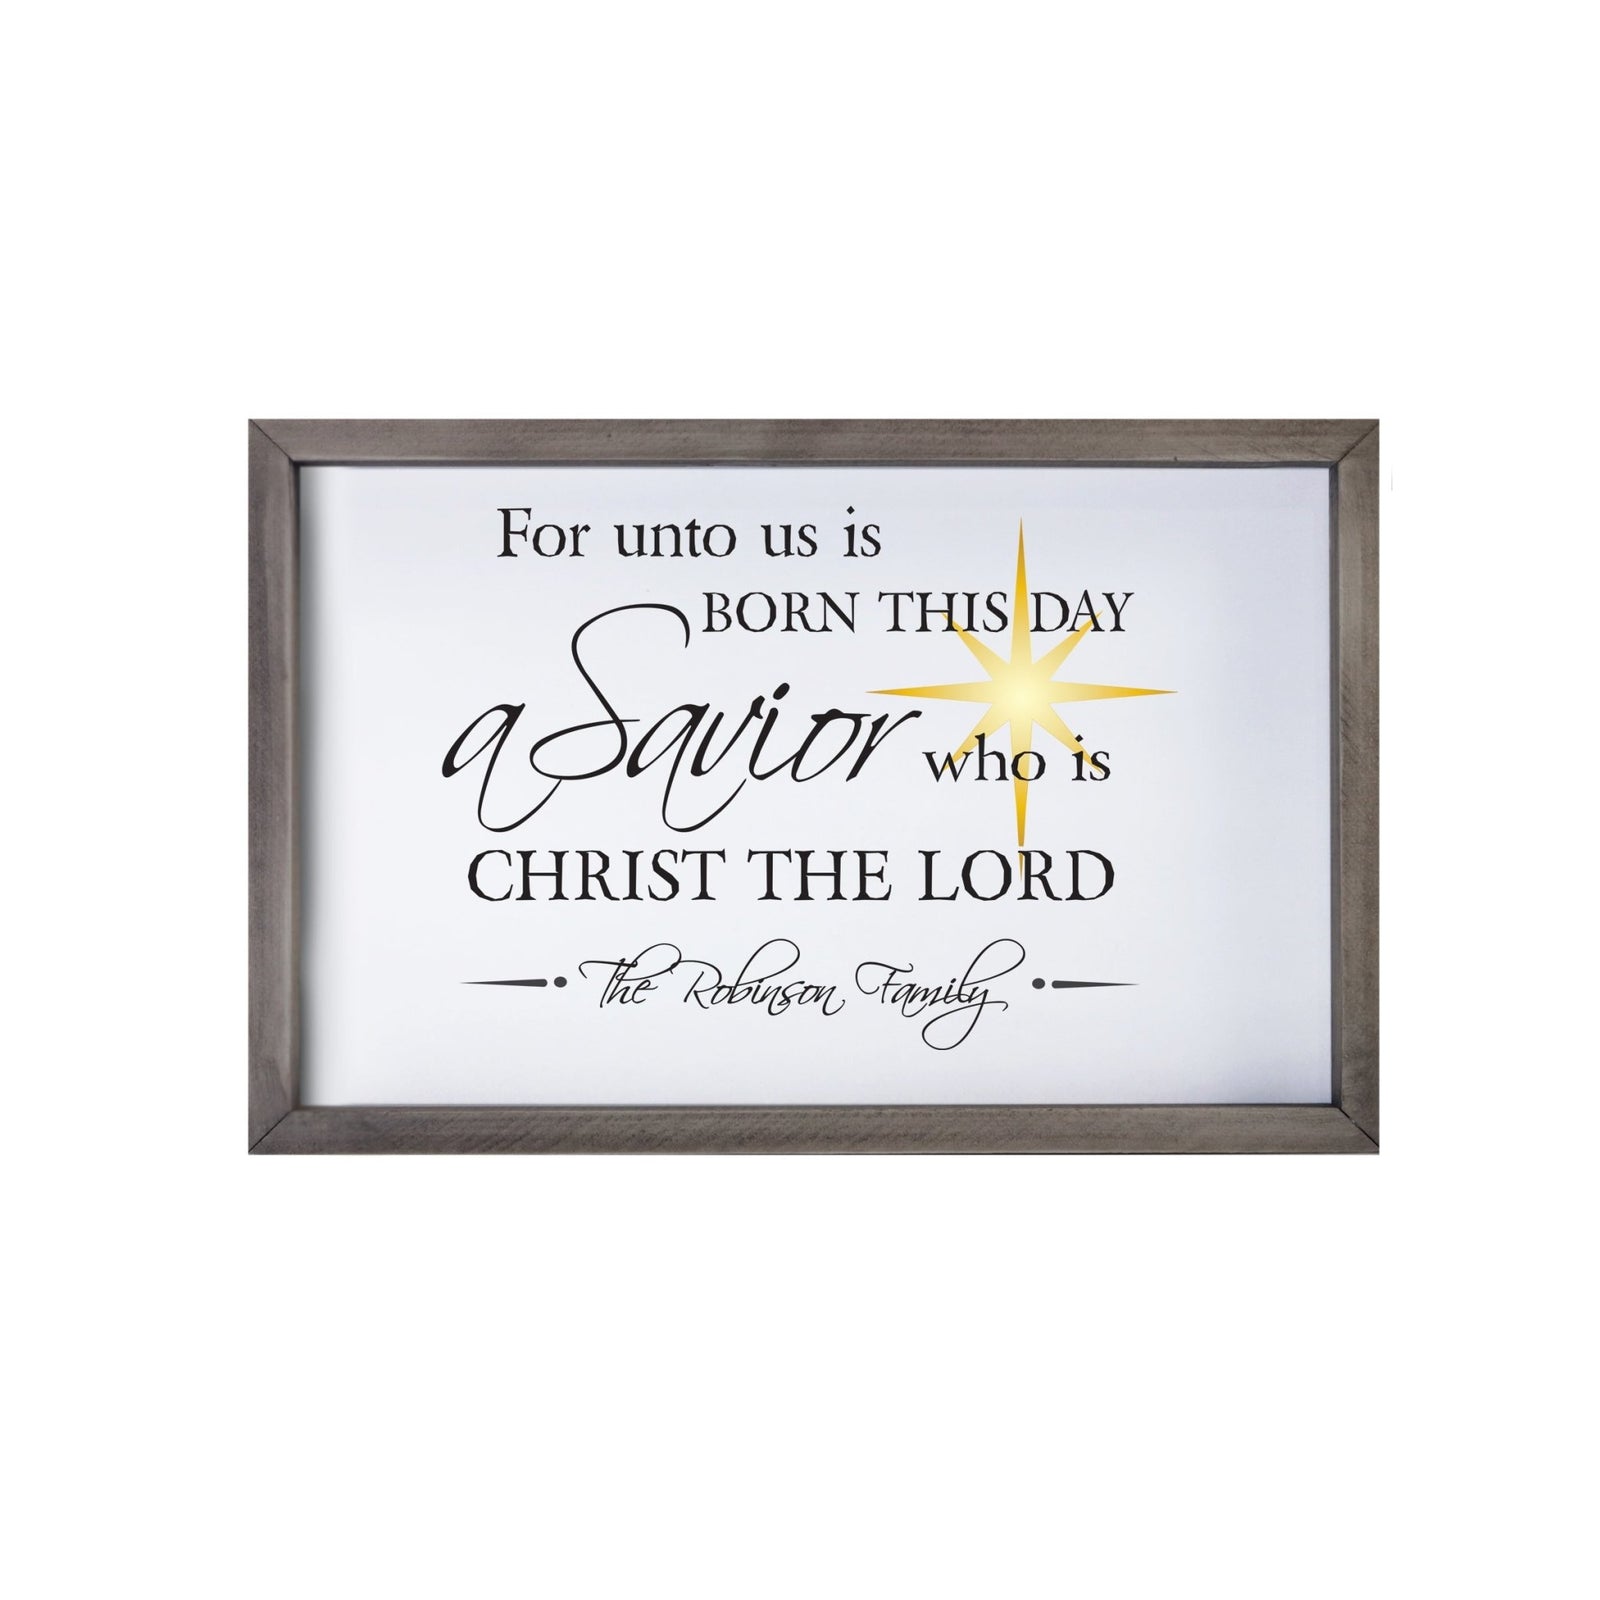 Personalized Merry Christmas Framed Shadow Box - For Unto Us - LifeSong Milestones